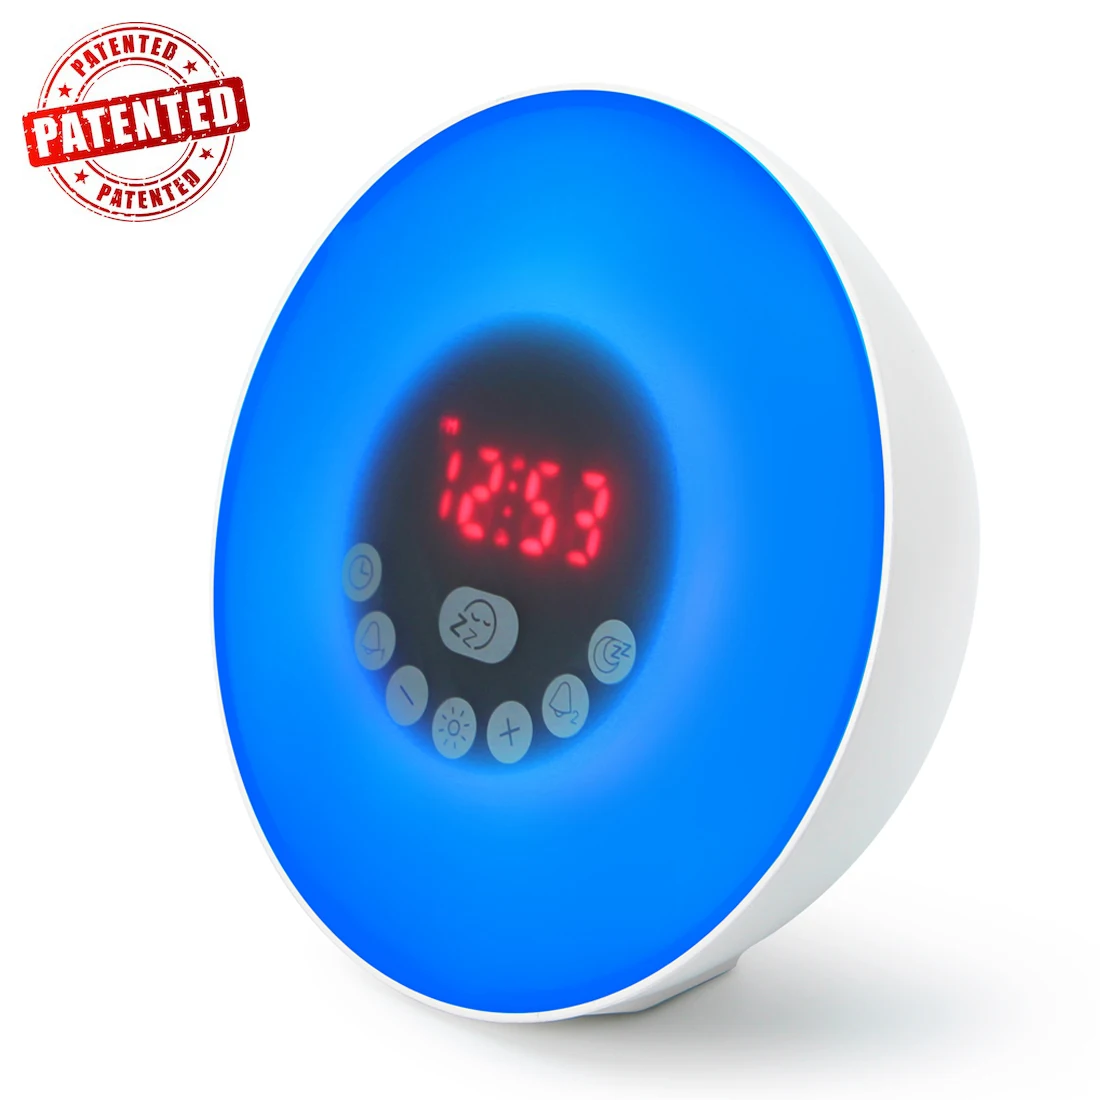 Digital Touch Sunrise Wake Up Light Alarm Clock Radio Bluetooth Speaker With 7 Color Changing Night Light  For Bedroom